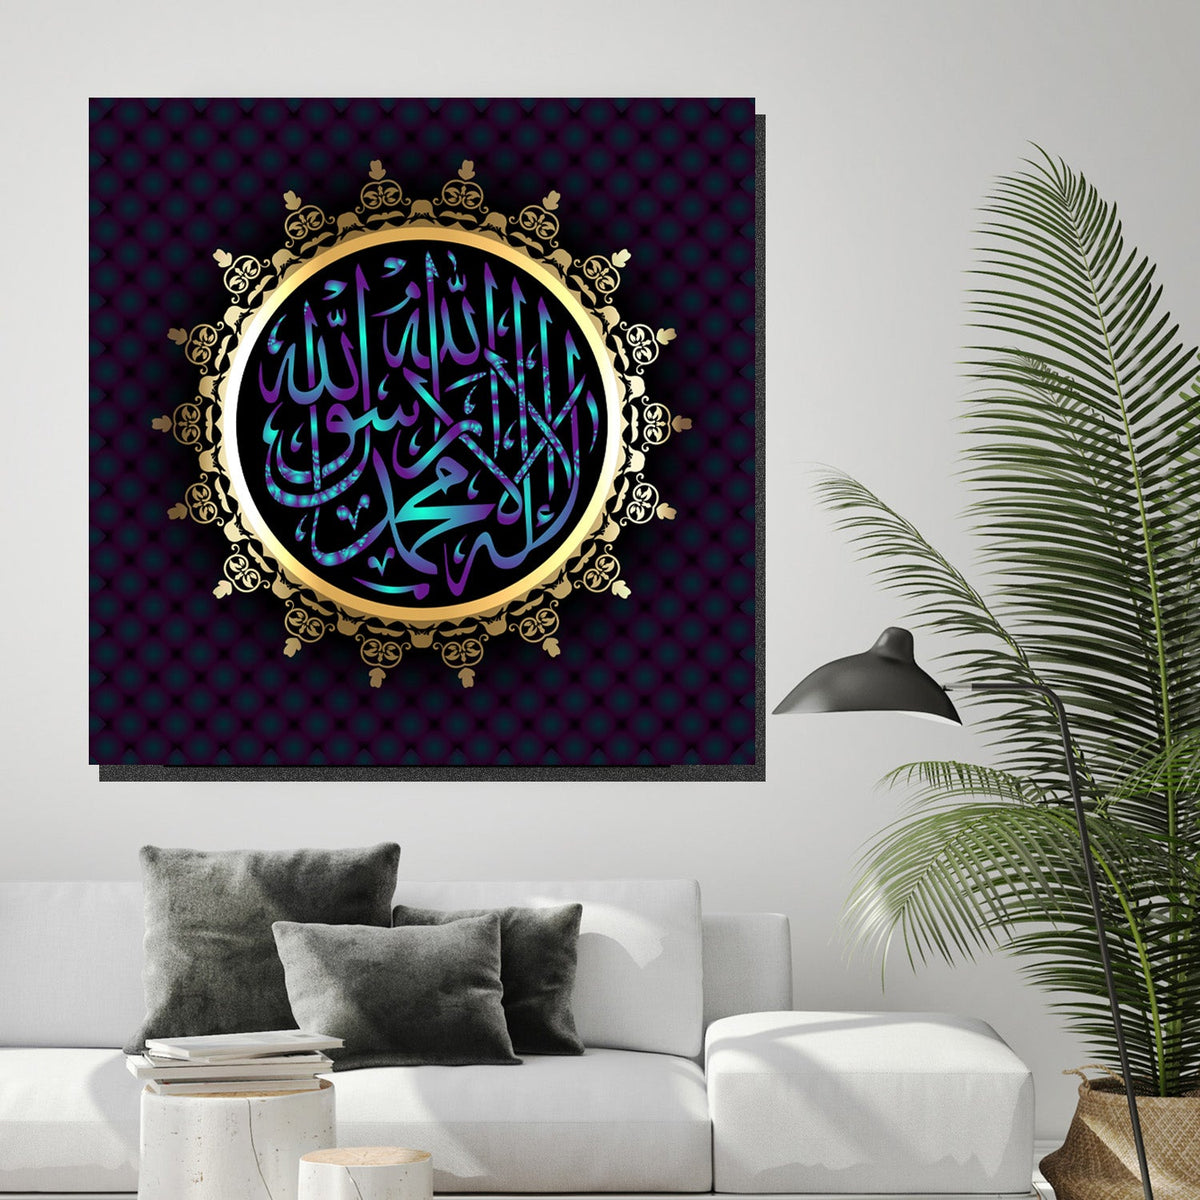 https://cdn.shopify.com/s/files/1/0387/9986/8044/products/IslamicArtLimitedEdition20CanvasArtprintStretched-1.jpg